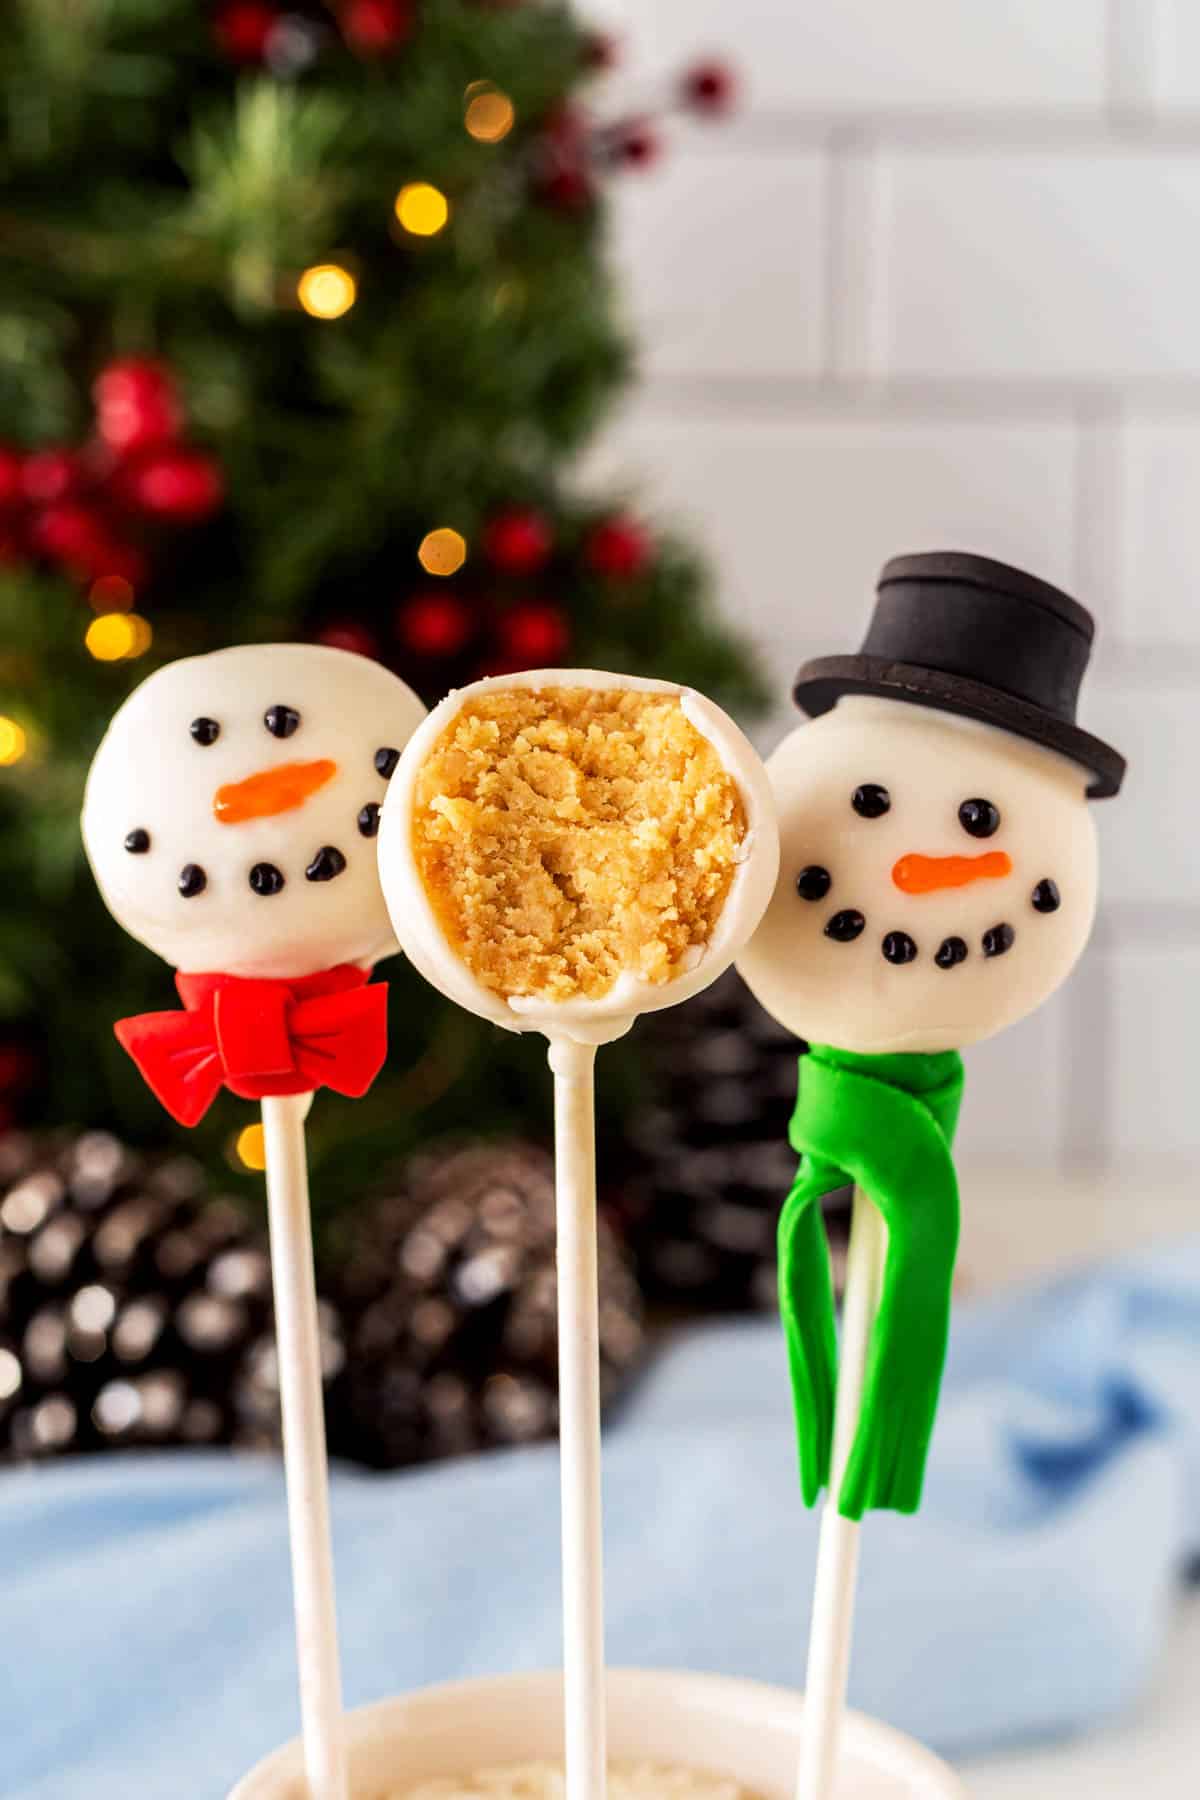 Three snowman cake pops but the middle one is half eaten. 